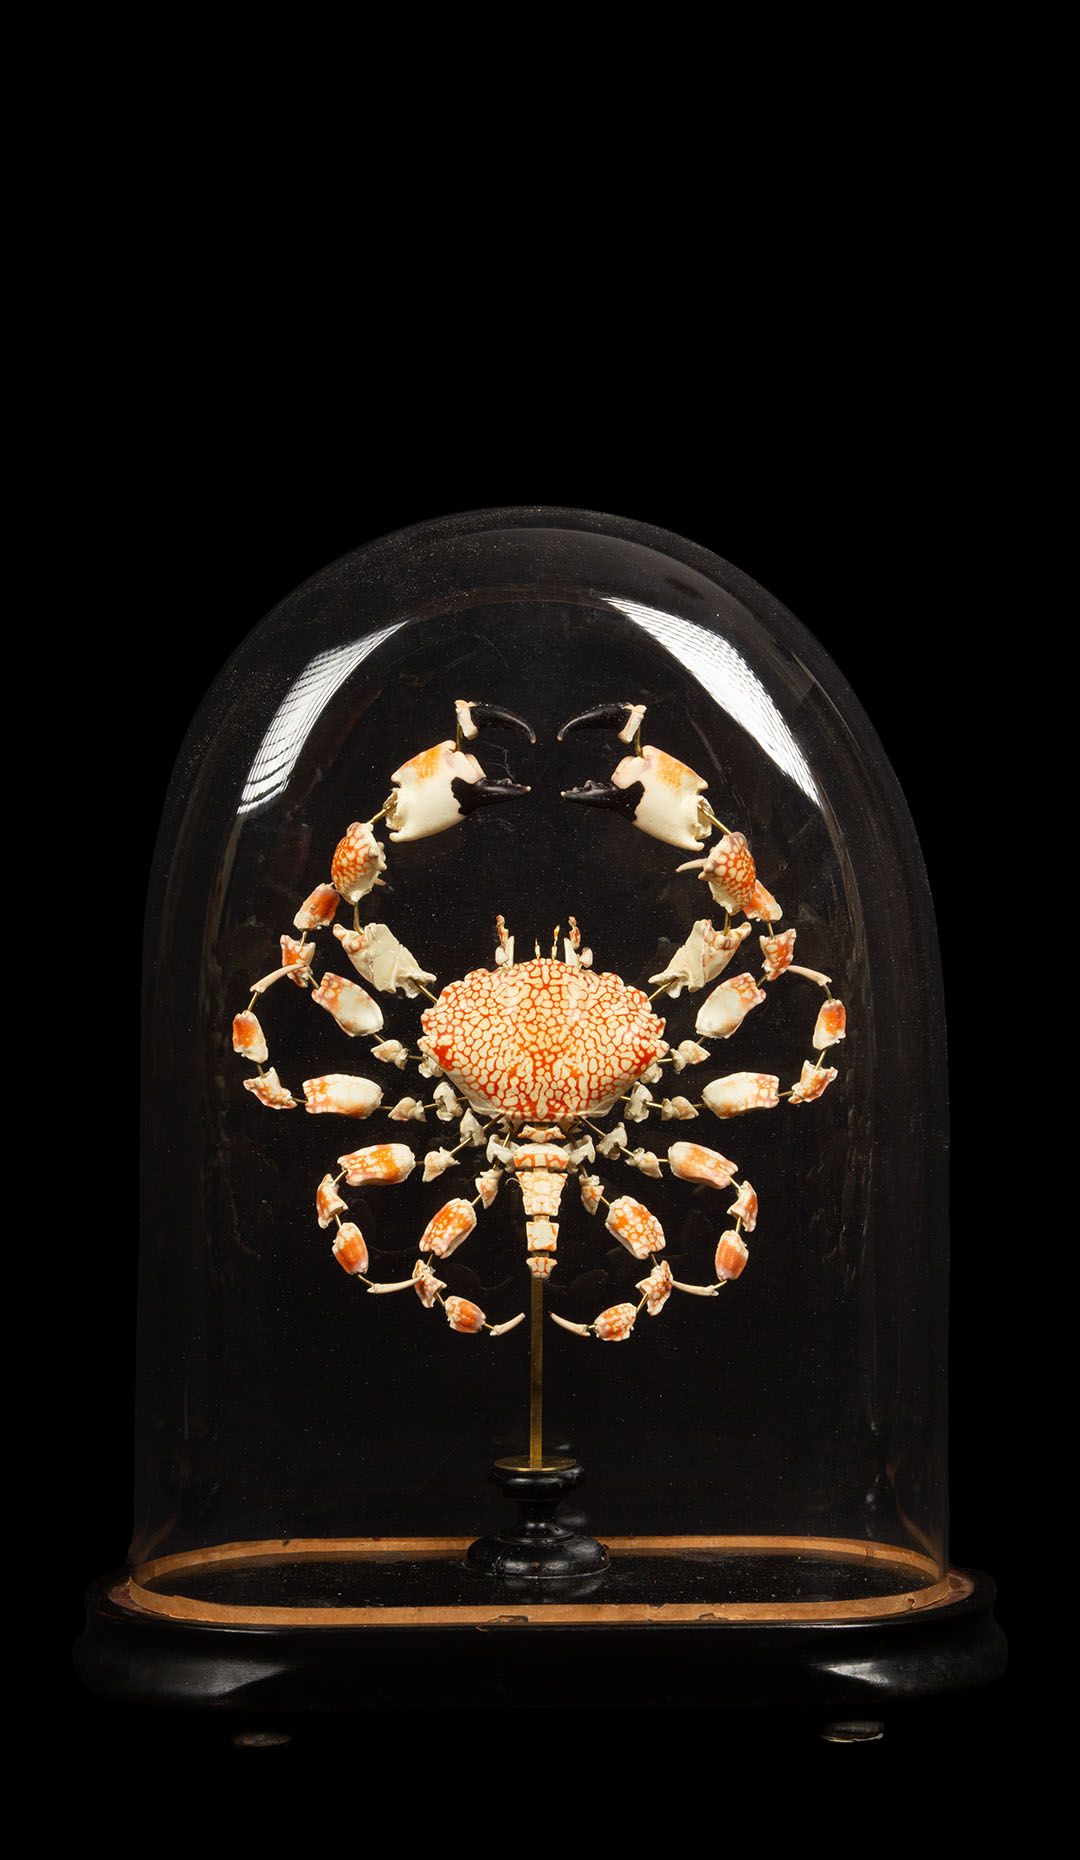 Deconstructed Mosaic Reef Crab (Lophozozymus Pictor) Under Antique Glass Dome